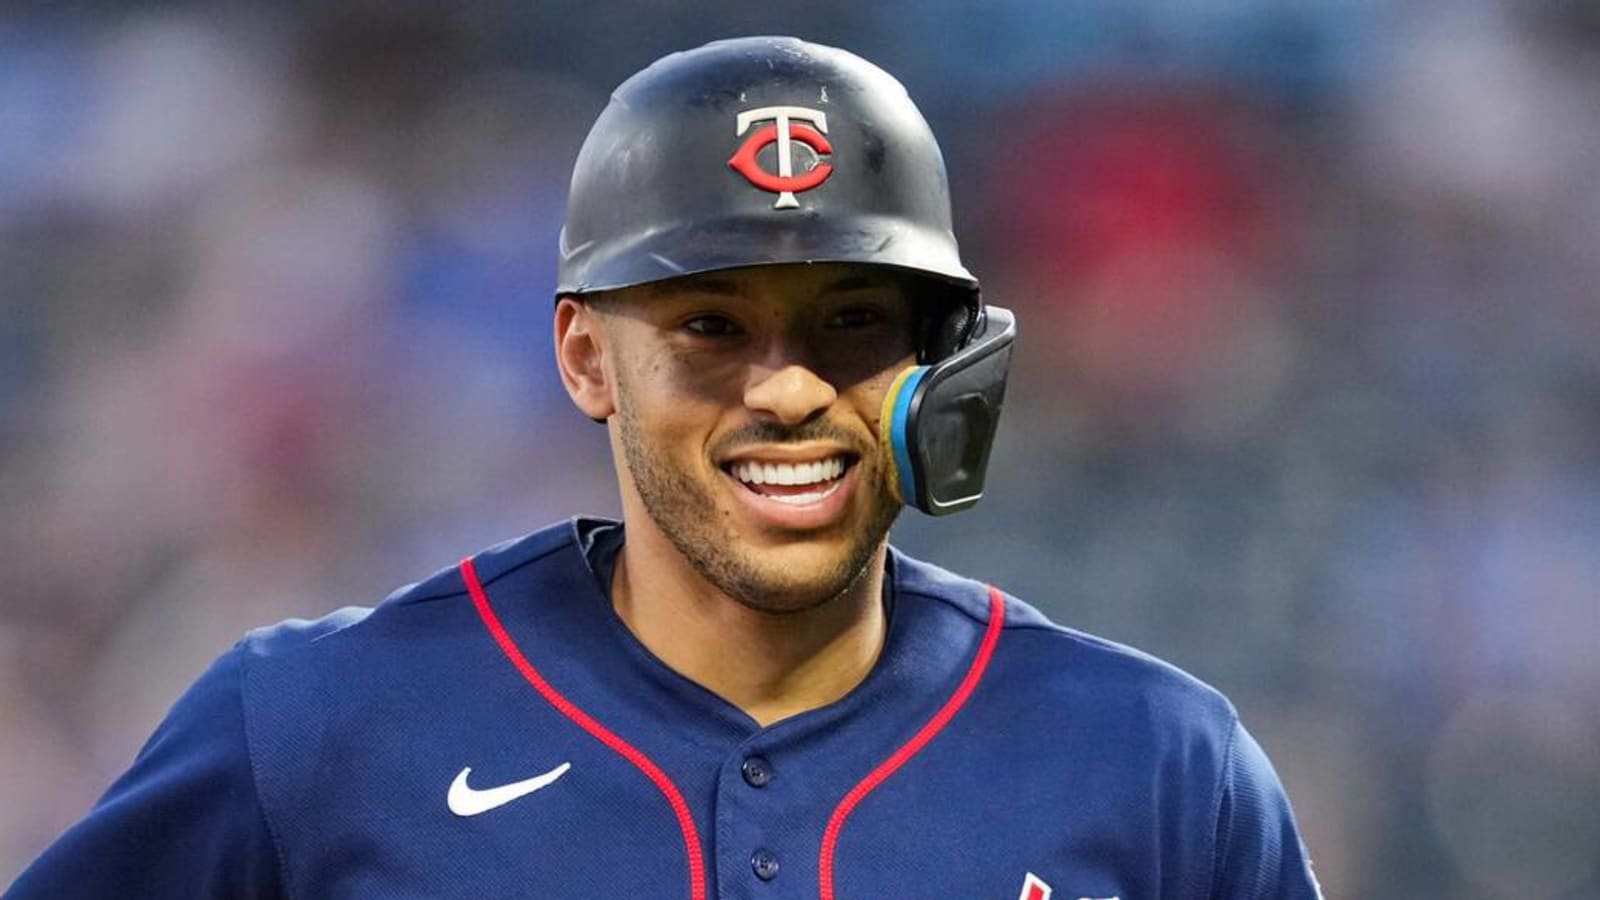 Twins have offered Carlos Correa 'multiple contracts' in free agency